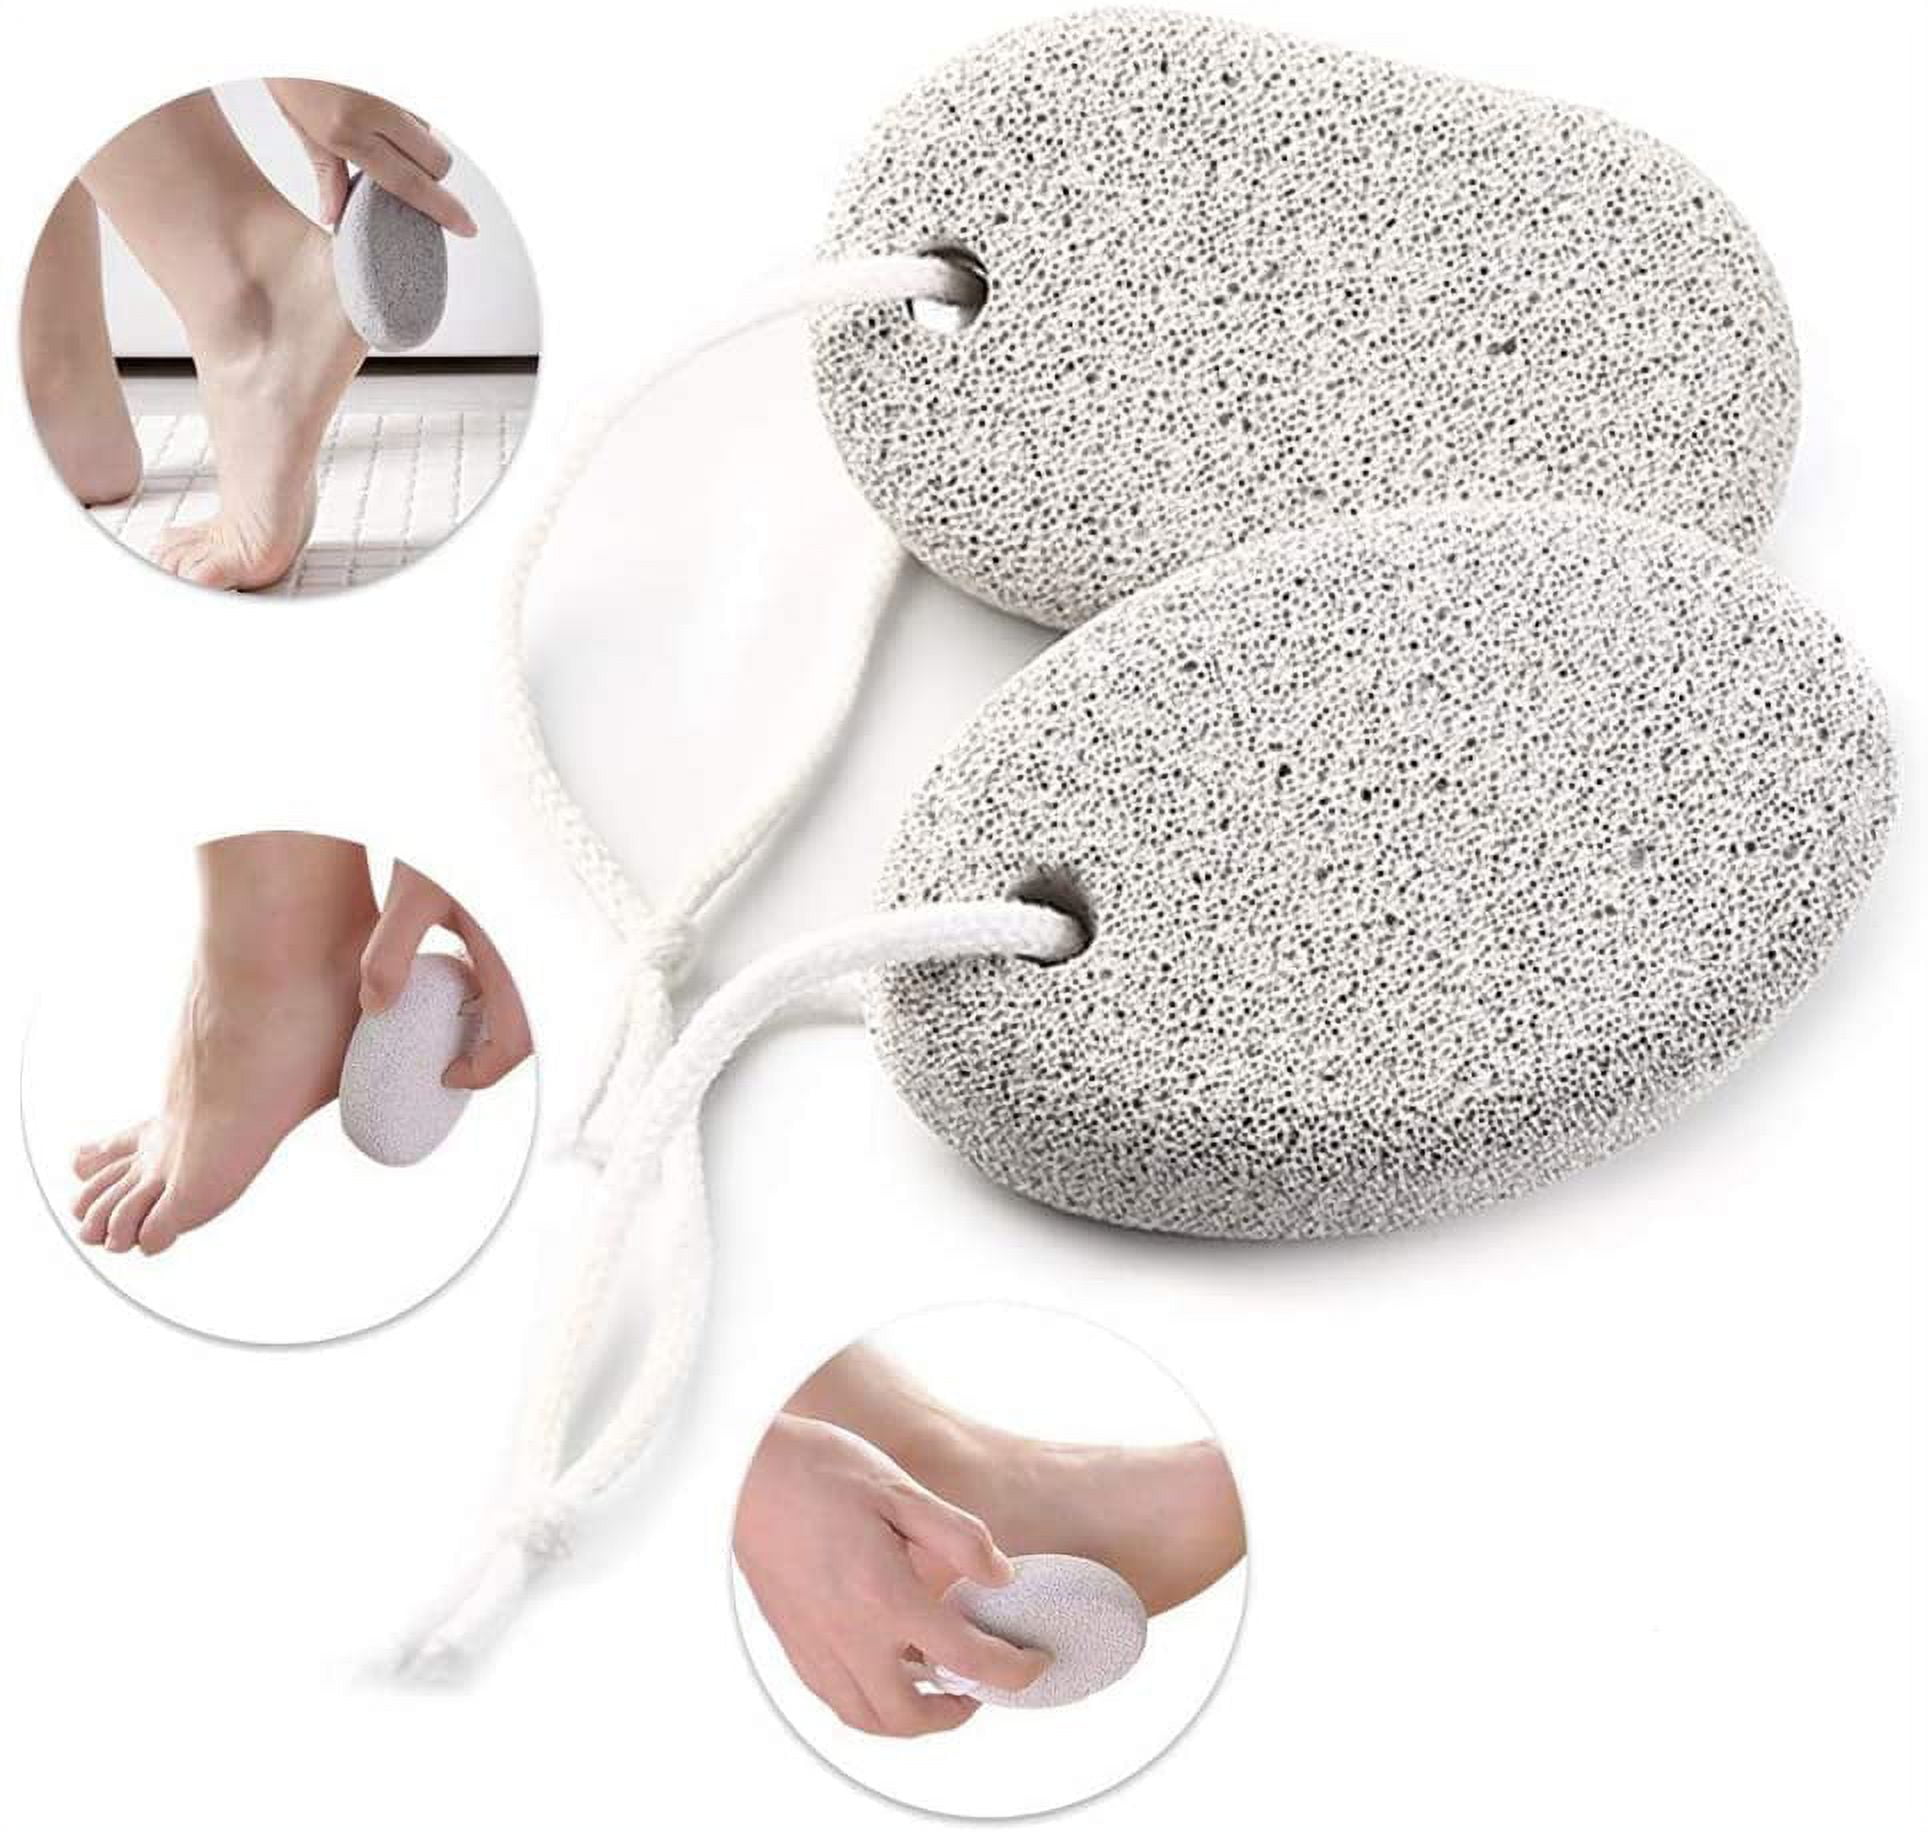 2PCS Natural Pumice Stone, Asqraqo Lava Pedicure Tools Hard Skin Callus  Remover for Feet and Hands - Foot File Exfoliation to Remove Dead Skin, and